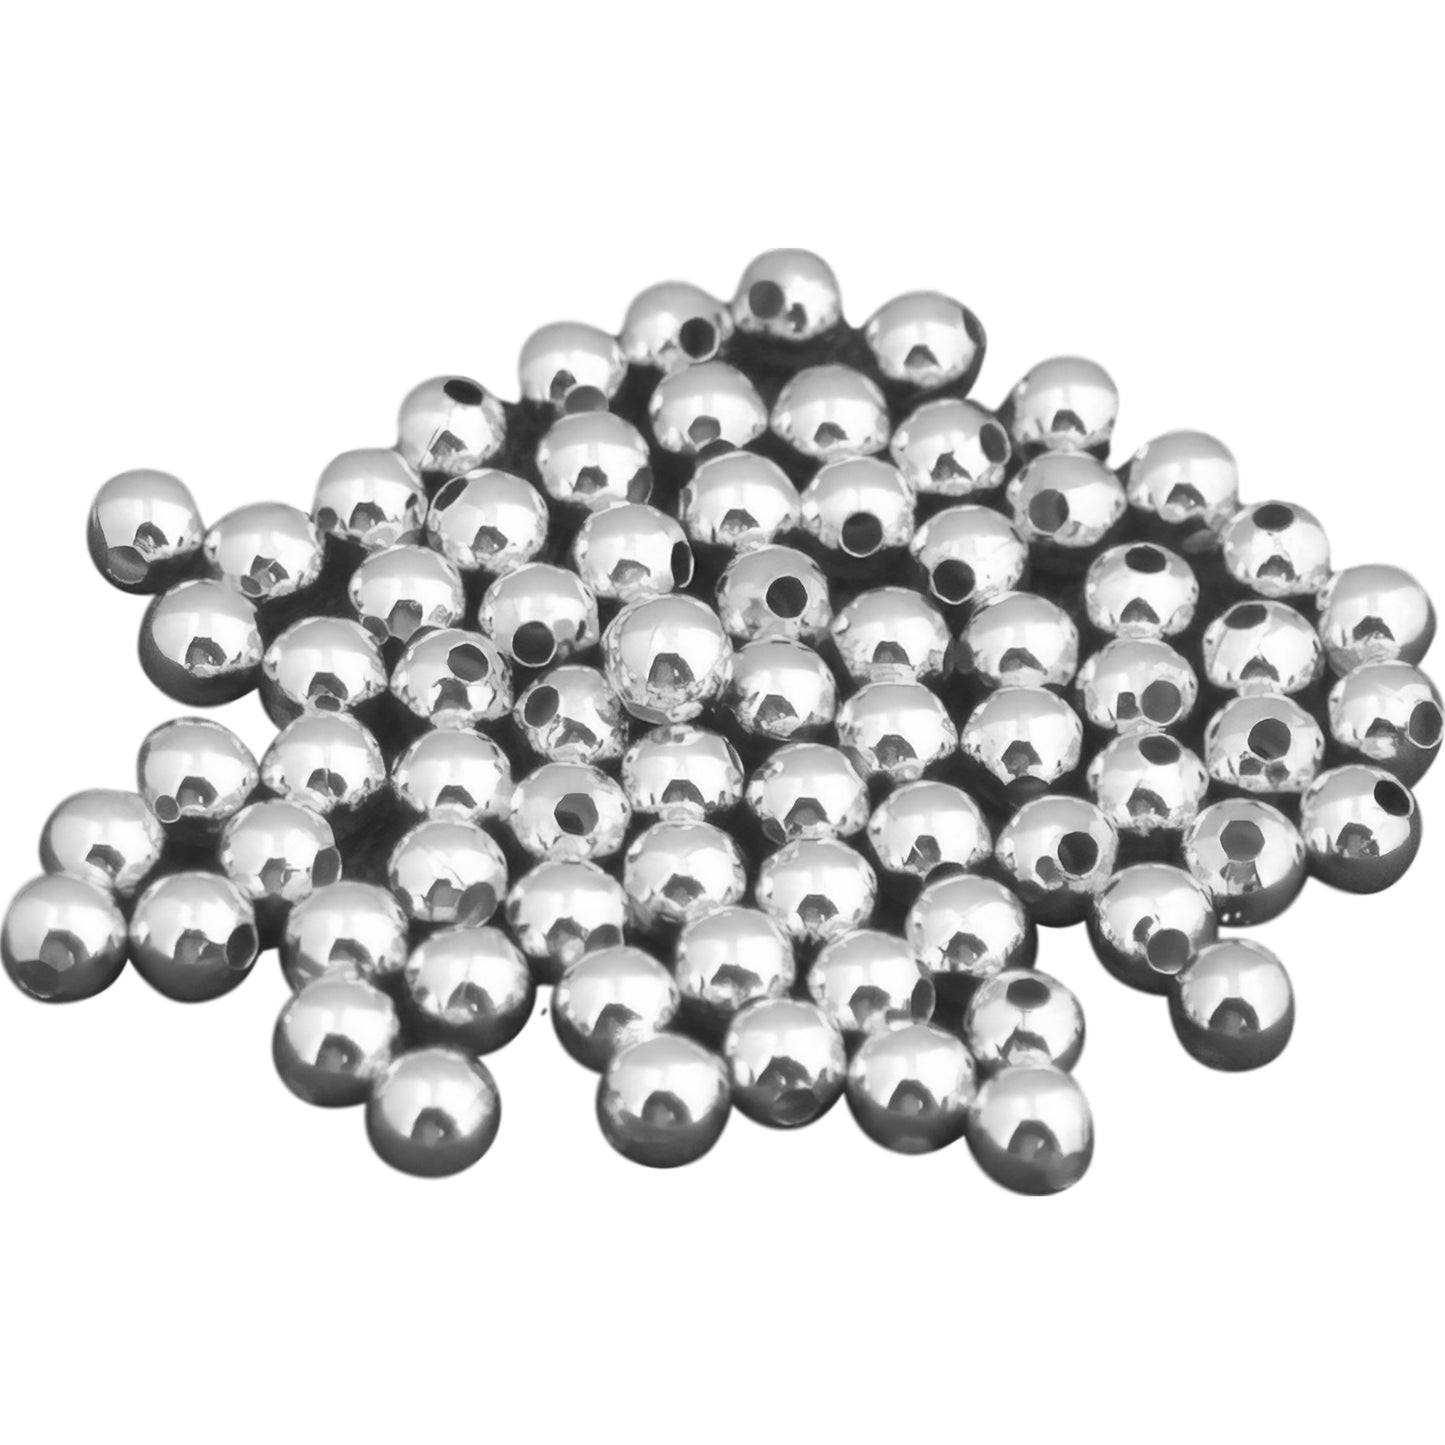 75 Ball Beads Sterling Silver Bead String Round Part 3mm